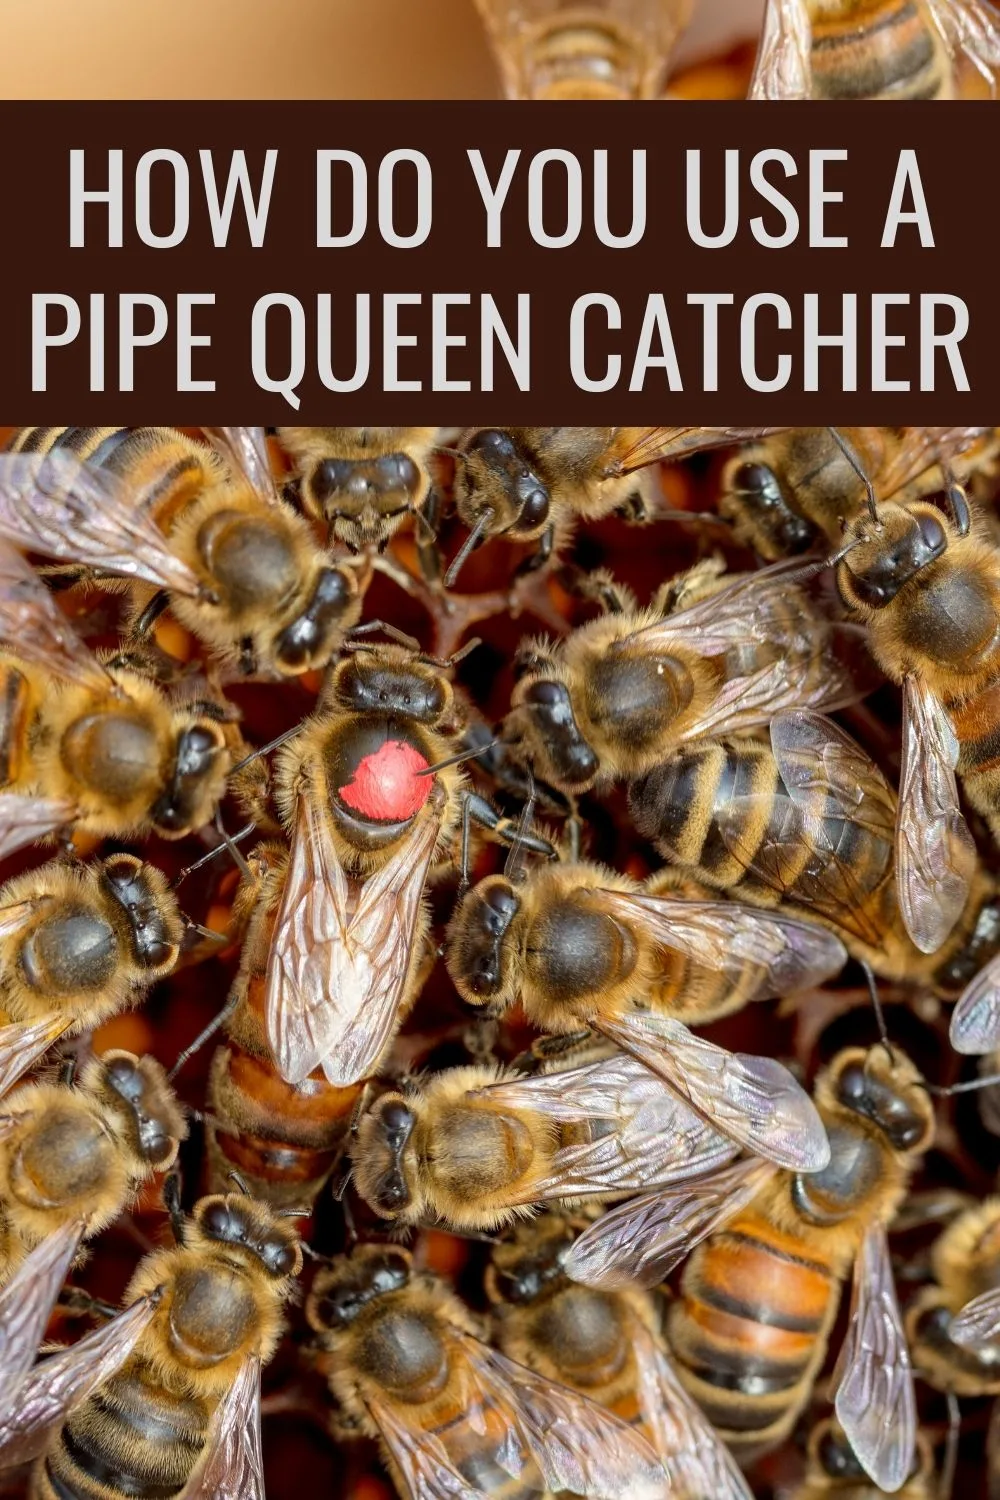 How Do You Use A Pipe Queen Catcher